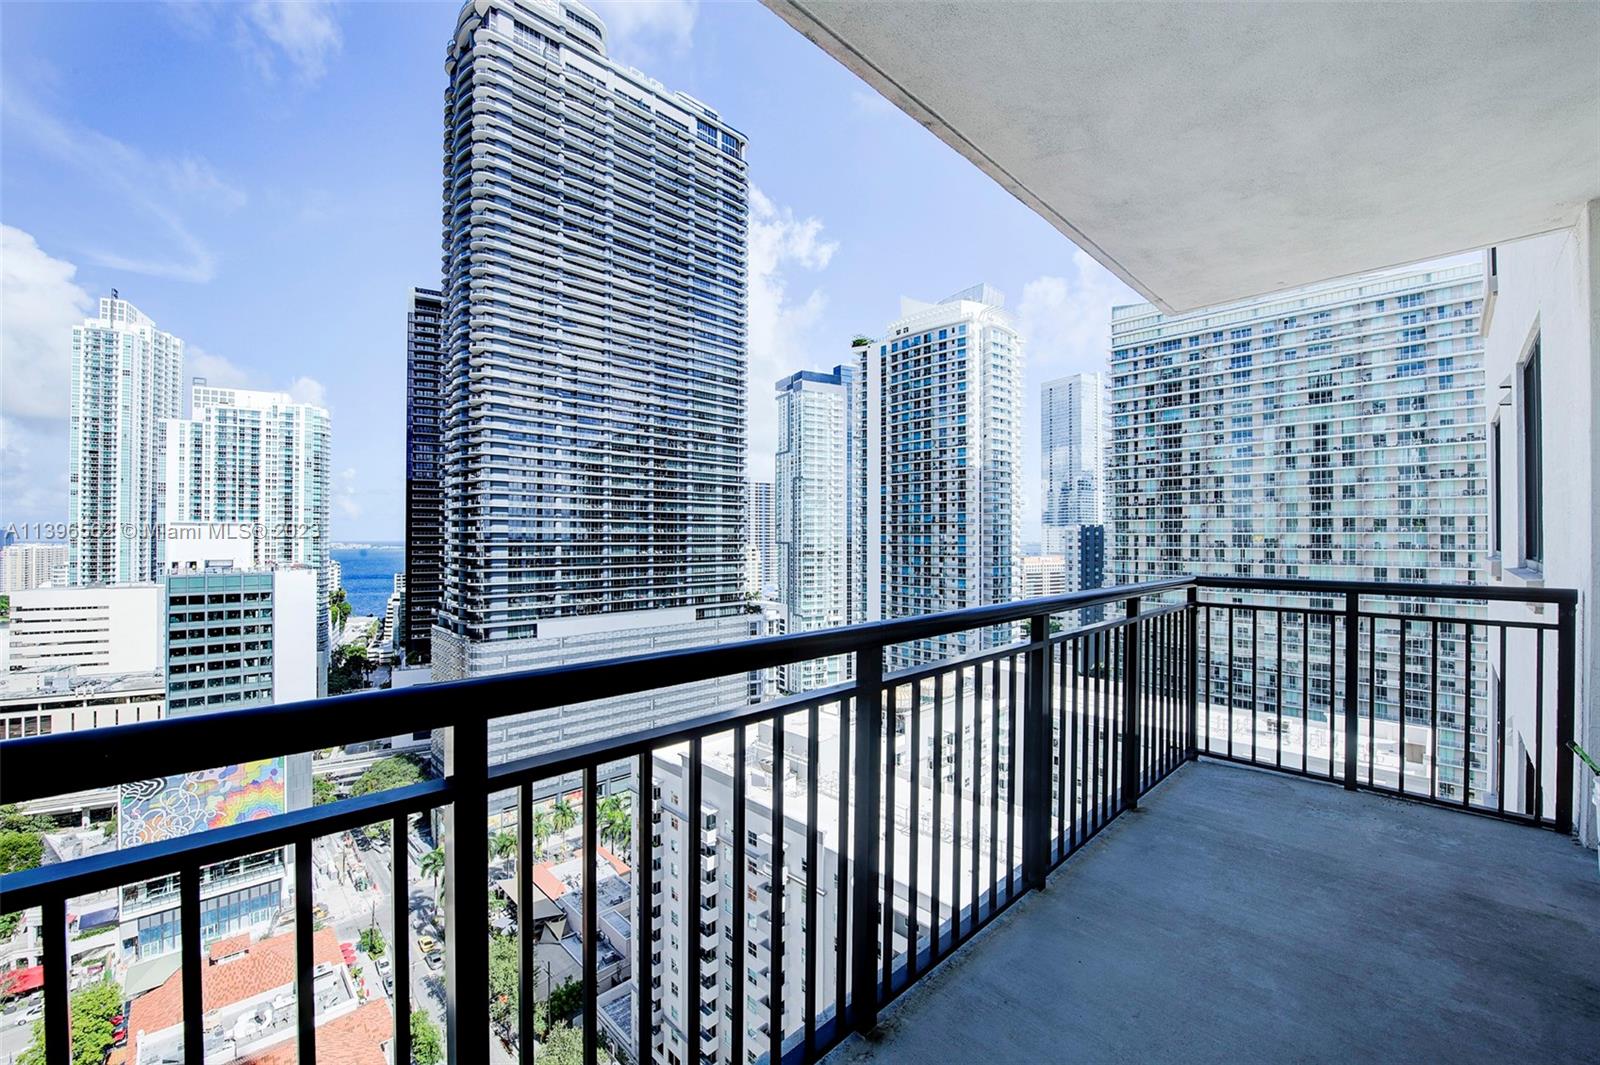 2 Bed, 2 bath  Unit at Nine, located in the heart of Mary Brickell Village. Enjoy an open floor plan with separate dining/ den area, ceramic floors, Spacious kitchen with plenty of storage, 2 walk in closets, a separate laundry room w/ full size washer &   dryer side by side with open skyline views. Can rent up to 12x per year, 30 day minimum. Amenities include a 1- acre deck w/ an infinity edge pool, BBQ area, gym, business center, party room, children play areas, zen garden, valet. Nestled within Brickell's vibrant epicenter. Nine offers direct access to publix supermarket. 1 Block away is Brickell City Center, home of Cinema CMX,  luxury shops & dining. Metrorail & metro mover across the street servicing universities. Hospitals. Miami Intl Airport 1 assigned parking and much more...